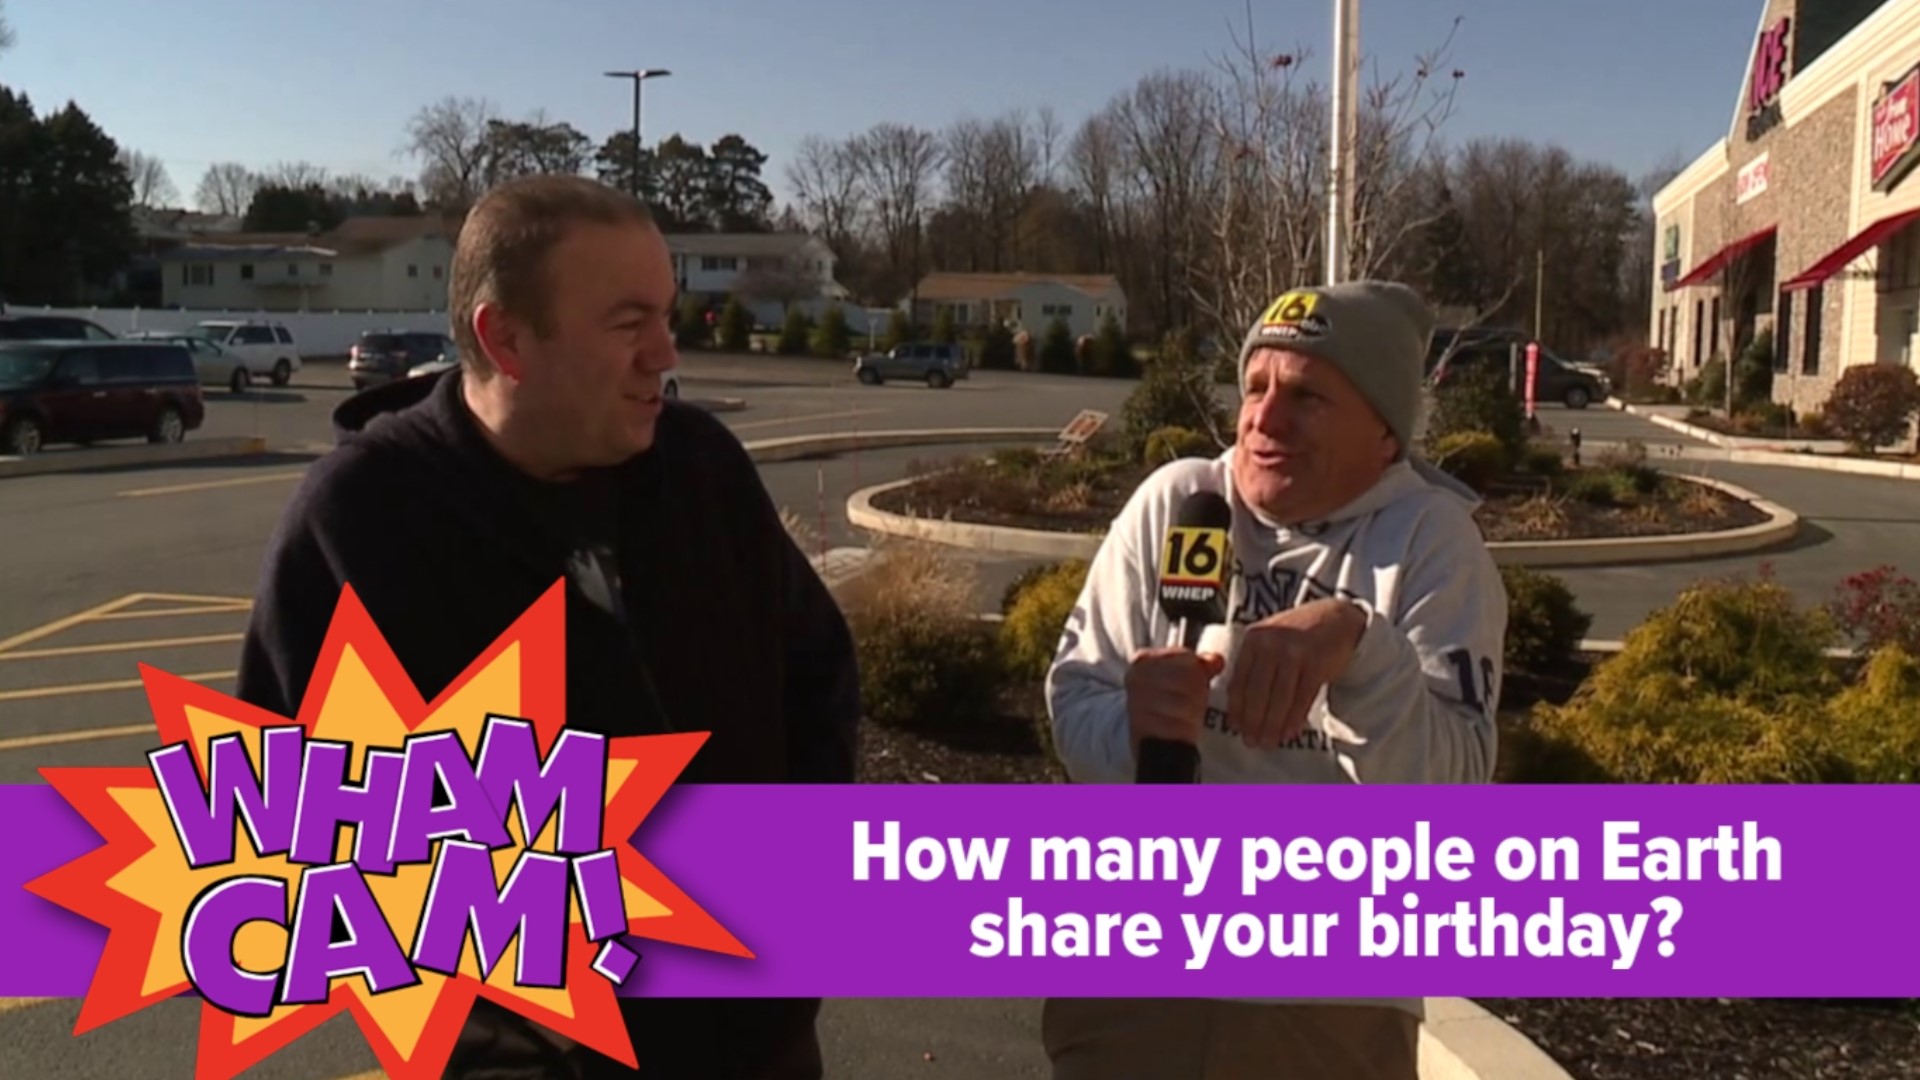 Ever wonder how many people on Earth share your birthday? Joe Snedeker was in Moosic to see if anyone there had the answer.